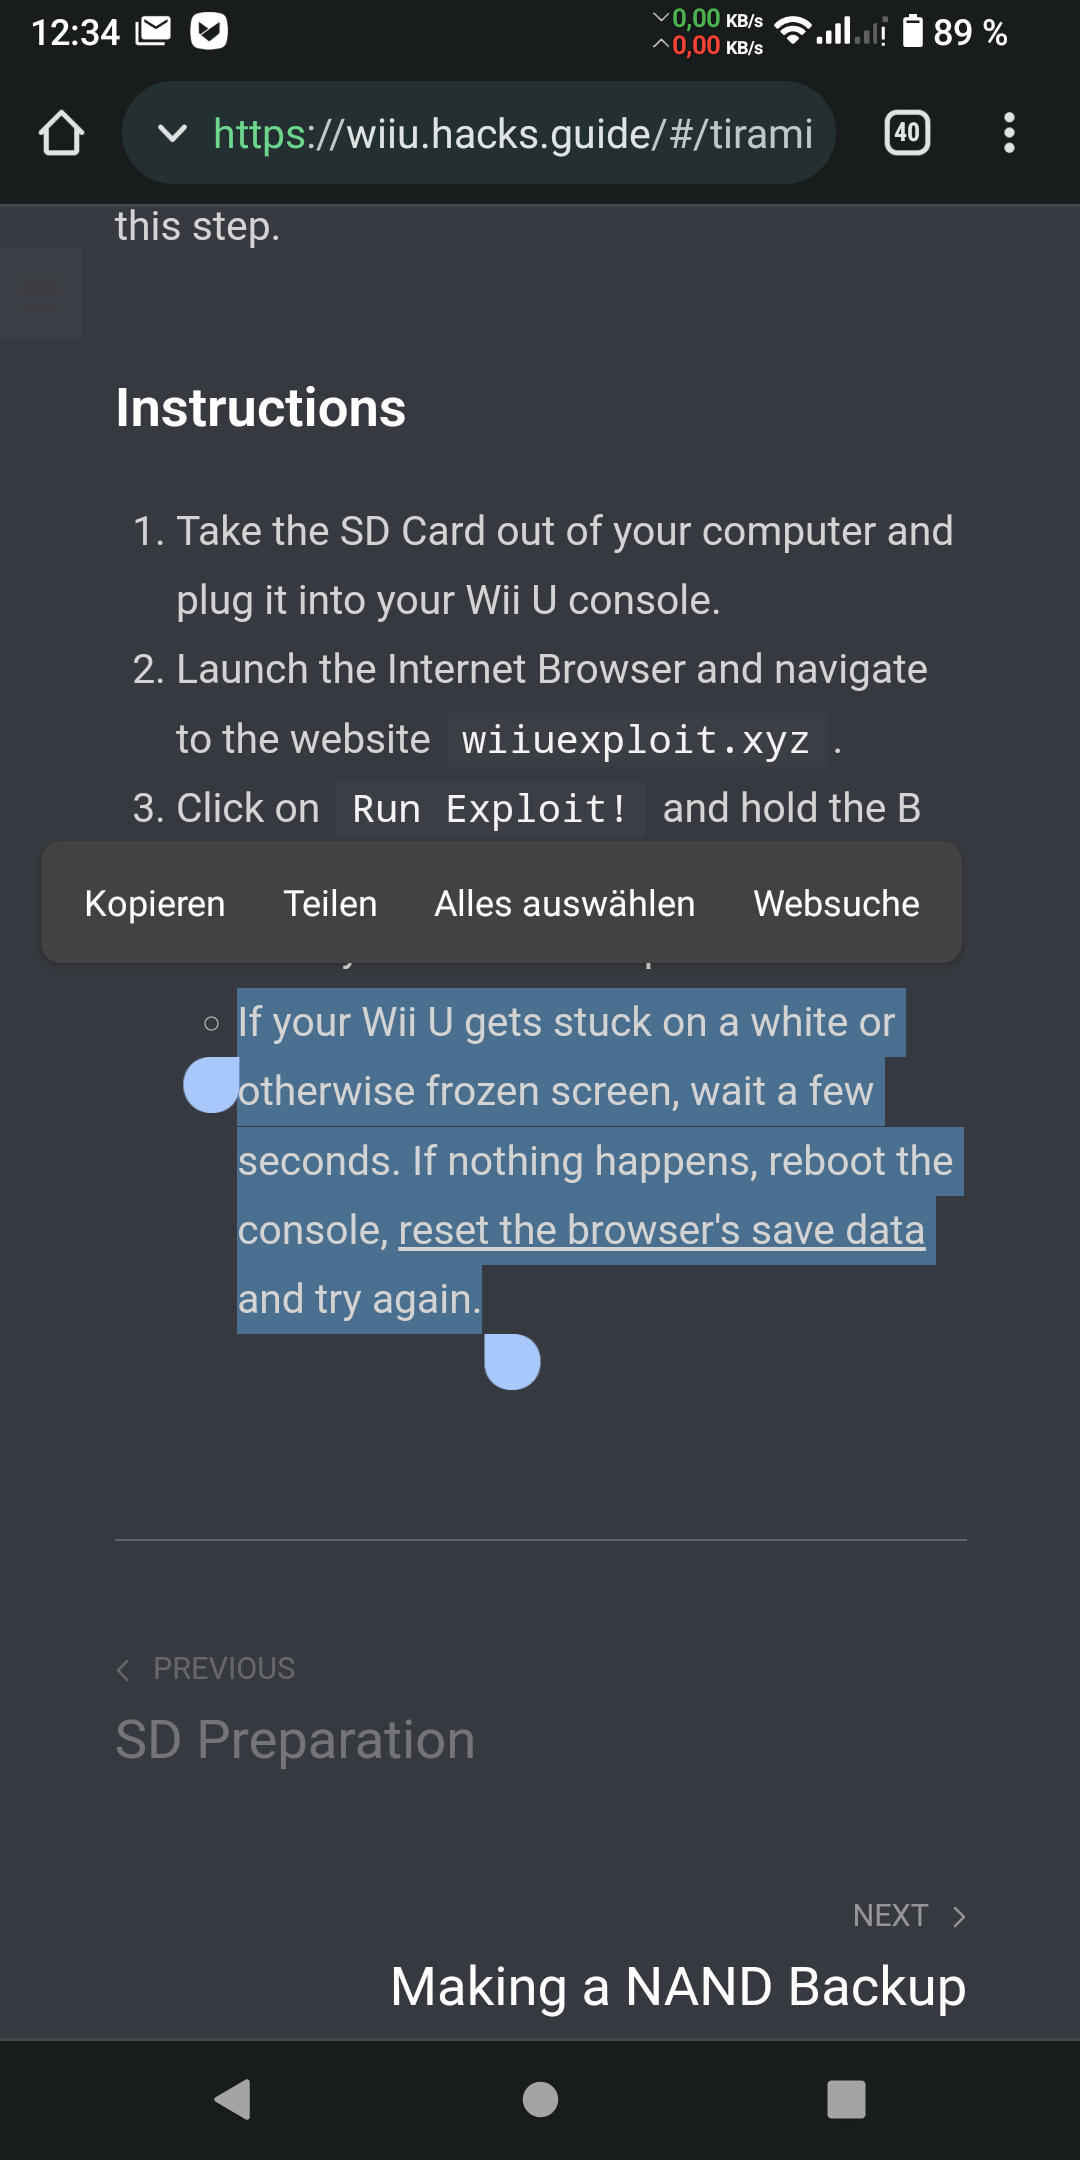 homebrew left over on wii u, freezes browser after like 10 seconds |  GBAtemp.net - The Independent Video Game Community